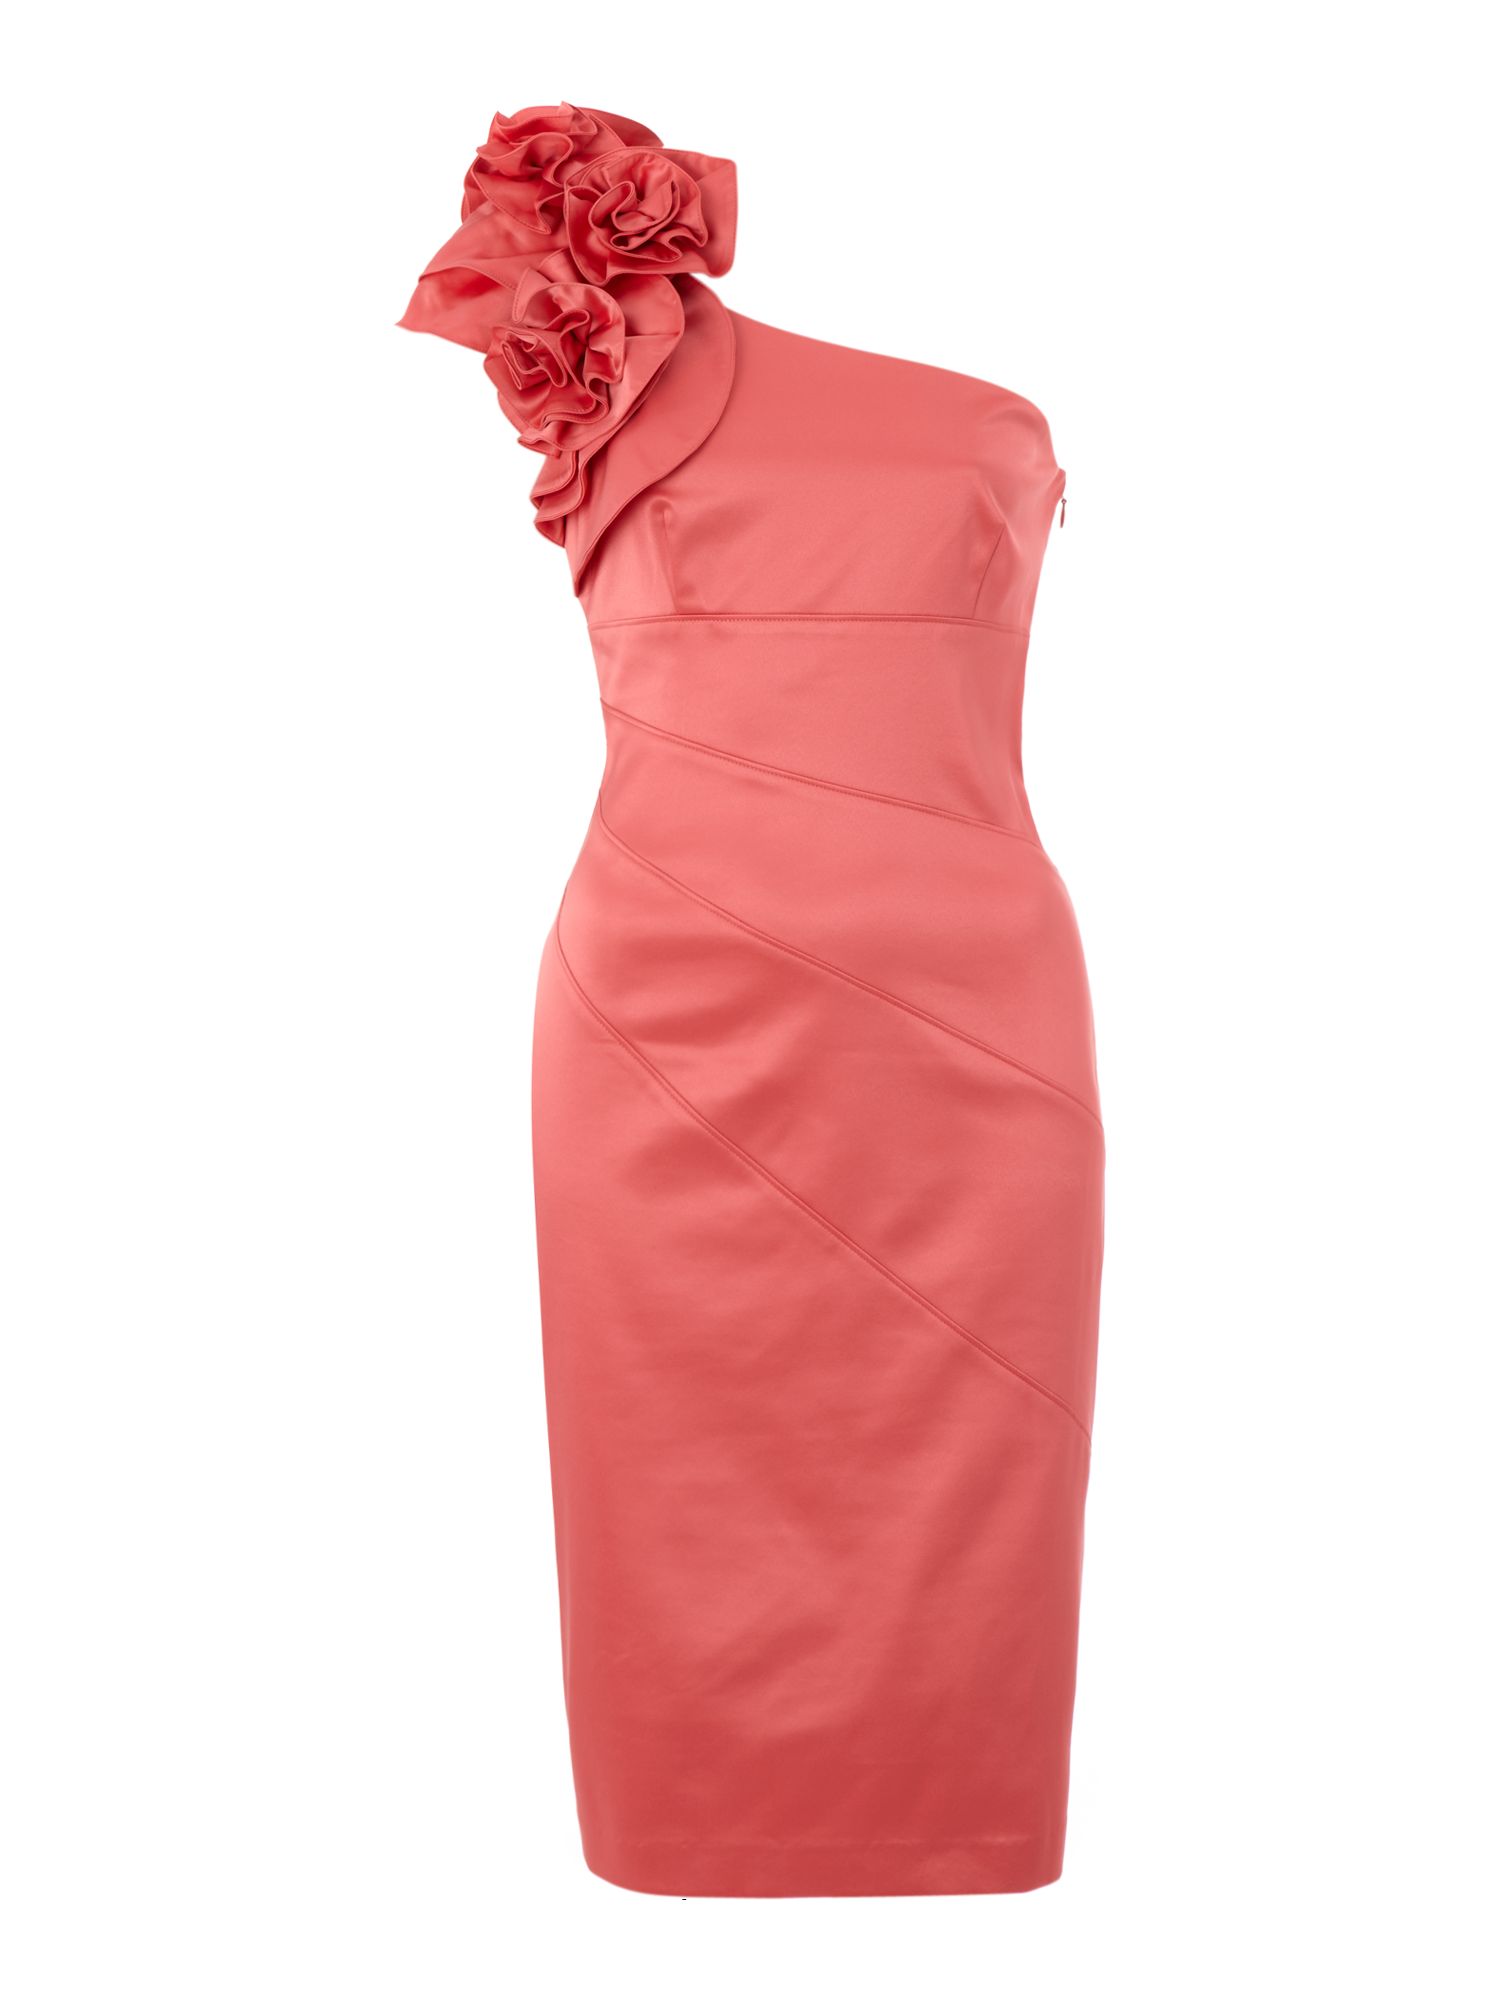 Untold Satin One Shoulder Ruffle Dress in Pink (coral) | Lyst